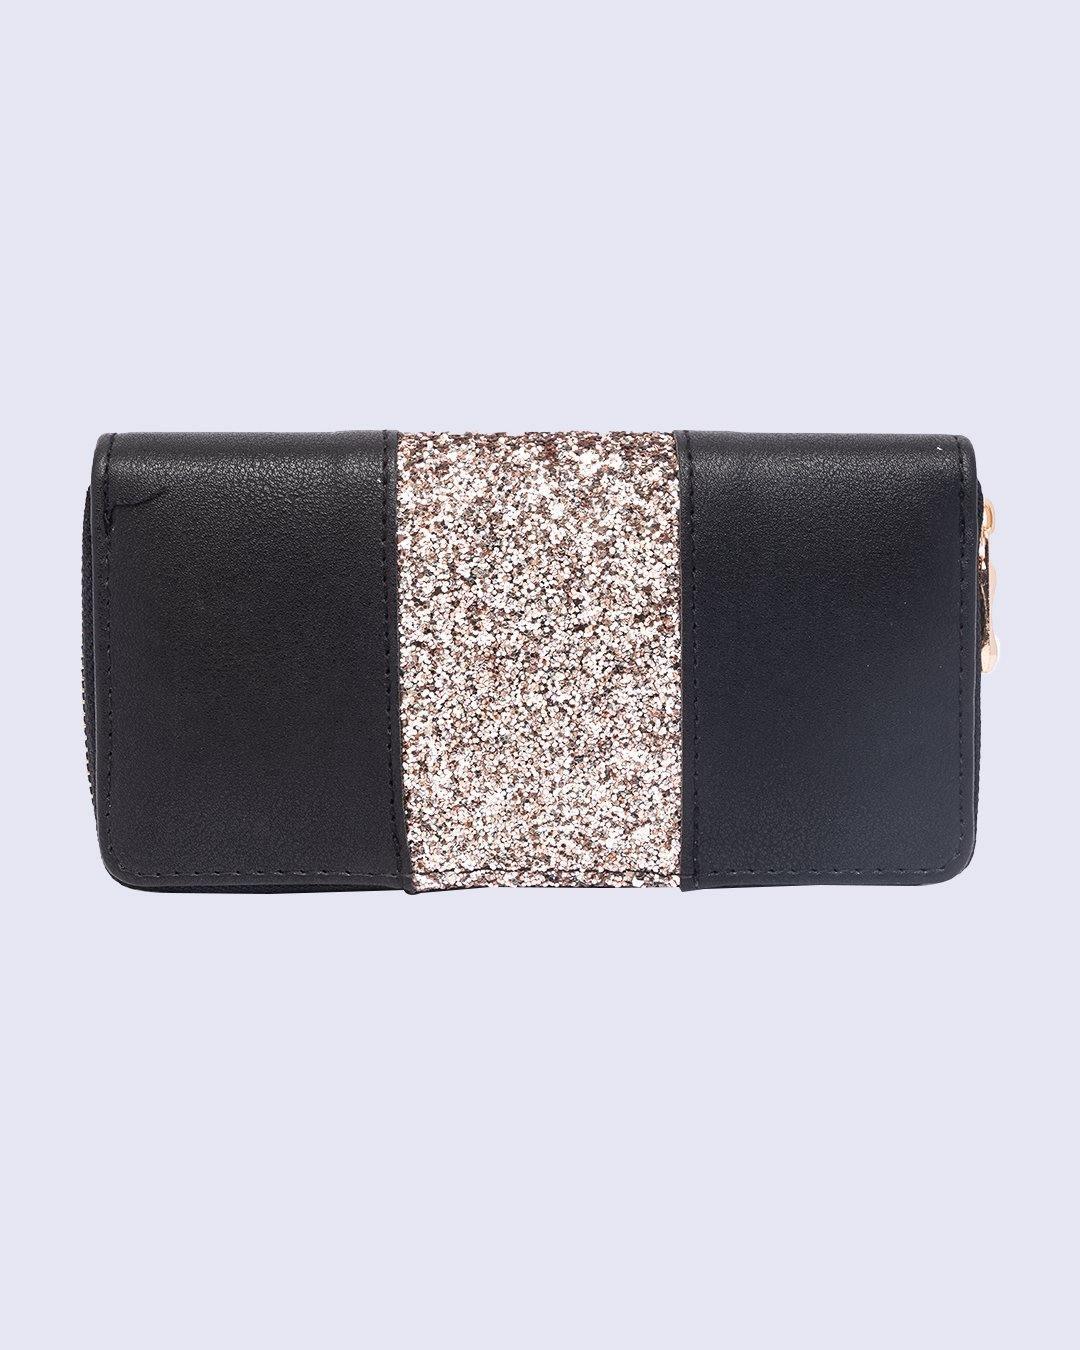 Mimco Gold Black Sparkle Glitter Purse Wallet Carry All Pouch Women's Used  Good Condition(s)